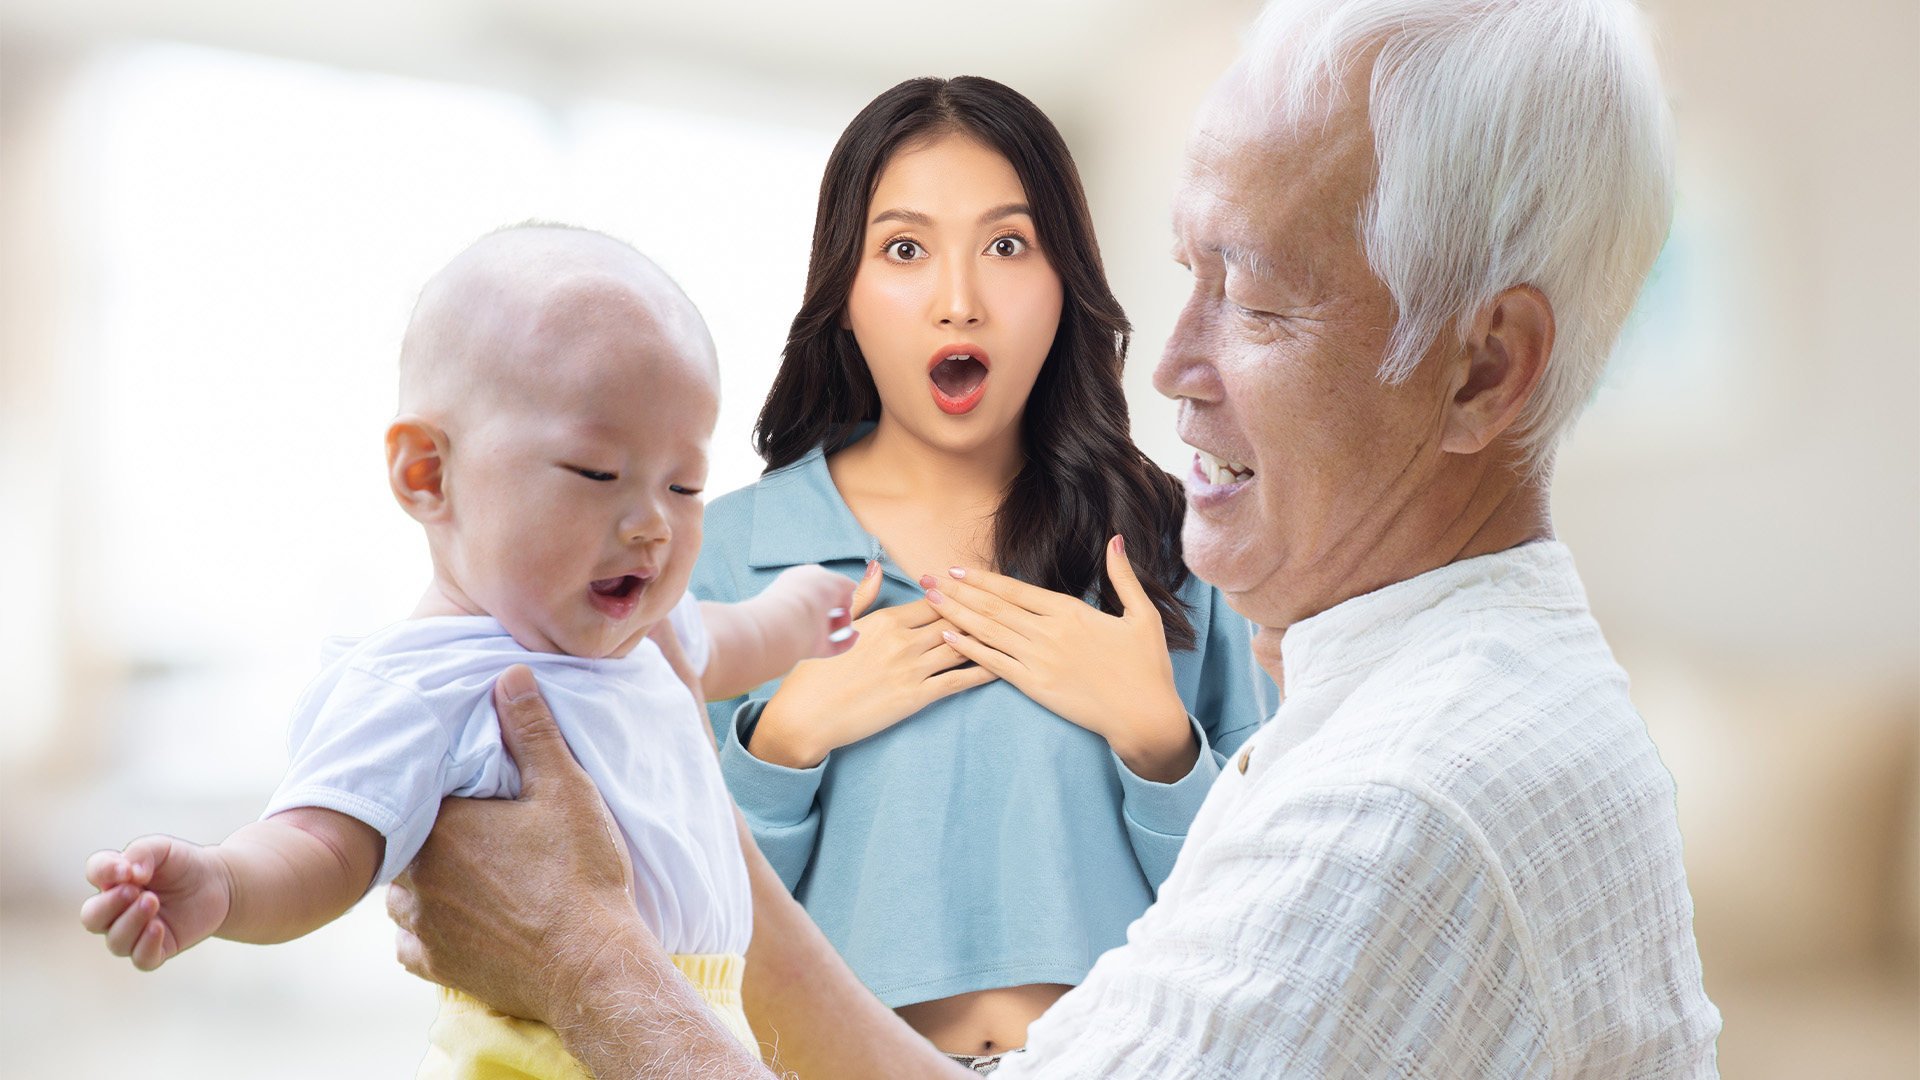 A man had secretly hired a surrogacy agency to get a baby girl after his only daughter told him she did not want to have children. Photo: SCMP composite/Shutterstock
